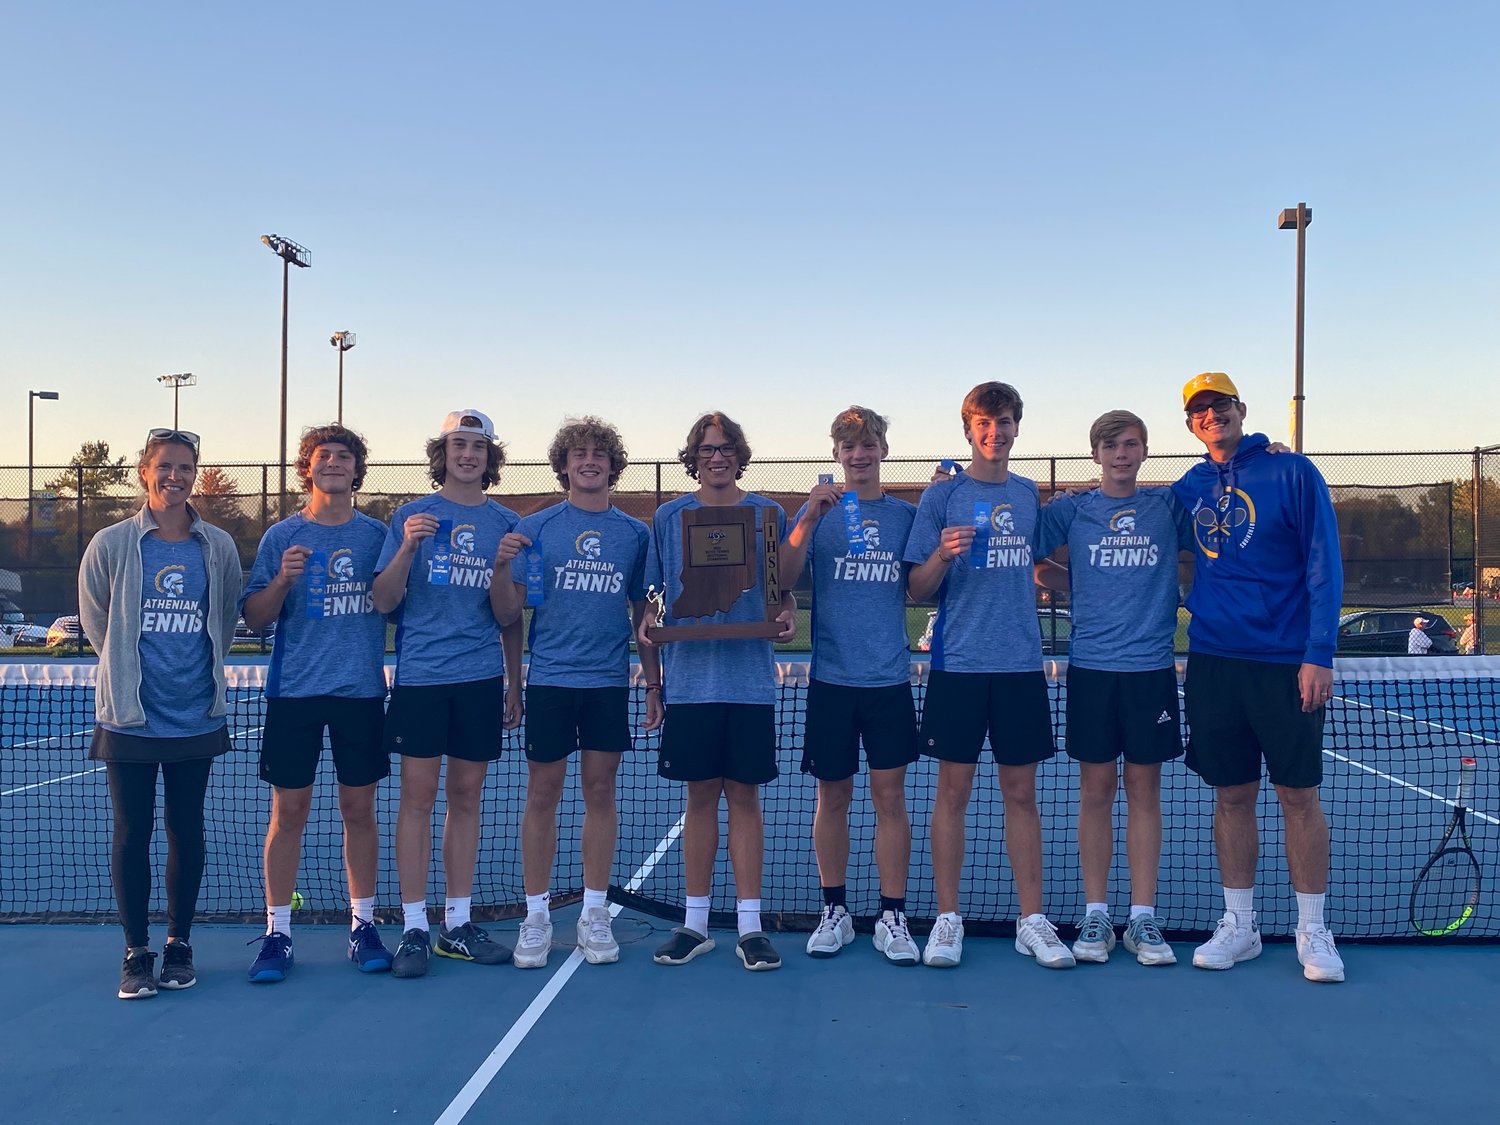 Crawfordsville boys tennis are the 2022 sectional champions as they defeated county rival Southmont 4-1 on Wednesday. It’s the 1st sectional title for CHS since 2017 and the 31st overall in school history.